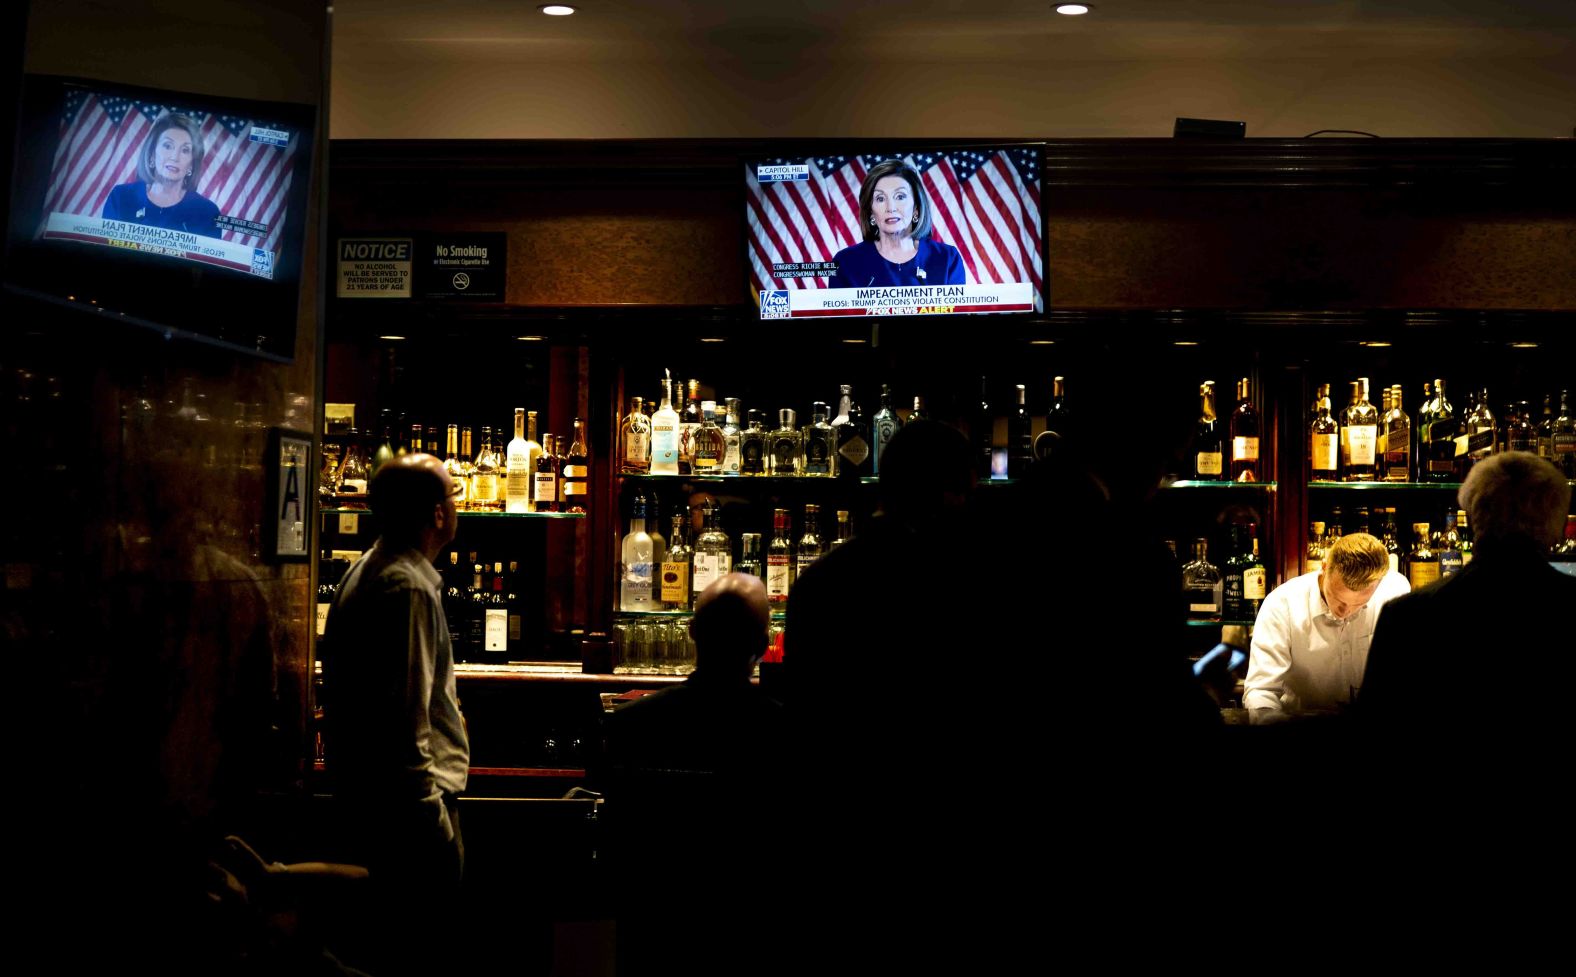 Two men inside New York's Trump Tower watch Pelosi on television on September 24. "Today, I am announcing the House of Representatives moving forward with an official impeachment inquiry," Pelosi said <a href="index.php?page=&url=https%3A%2F%2Fwww.cnn.com%2F2019%2F09%2F24%2Fpolitics%2Fdemocrats-impeachment-strategy%2Findex.html" target="_blank">in a brief speech in the Capitol,</a> adding, "The President must be held accountable. No one is above the law."